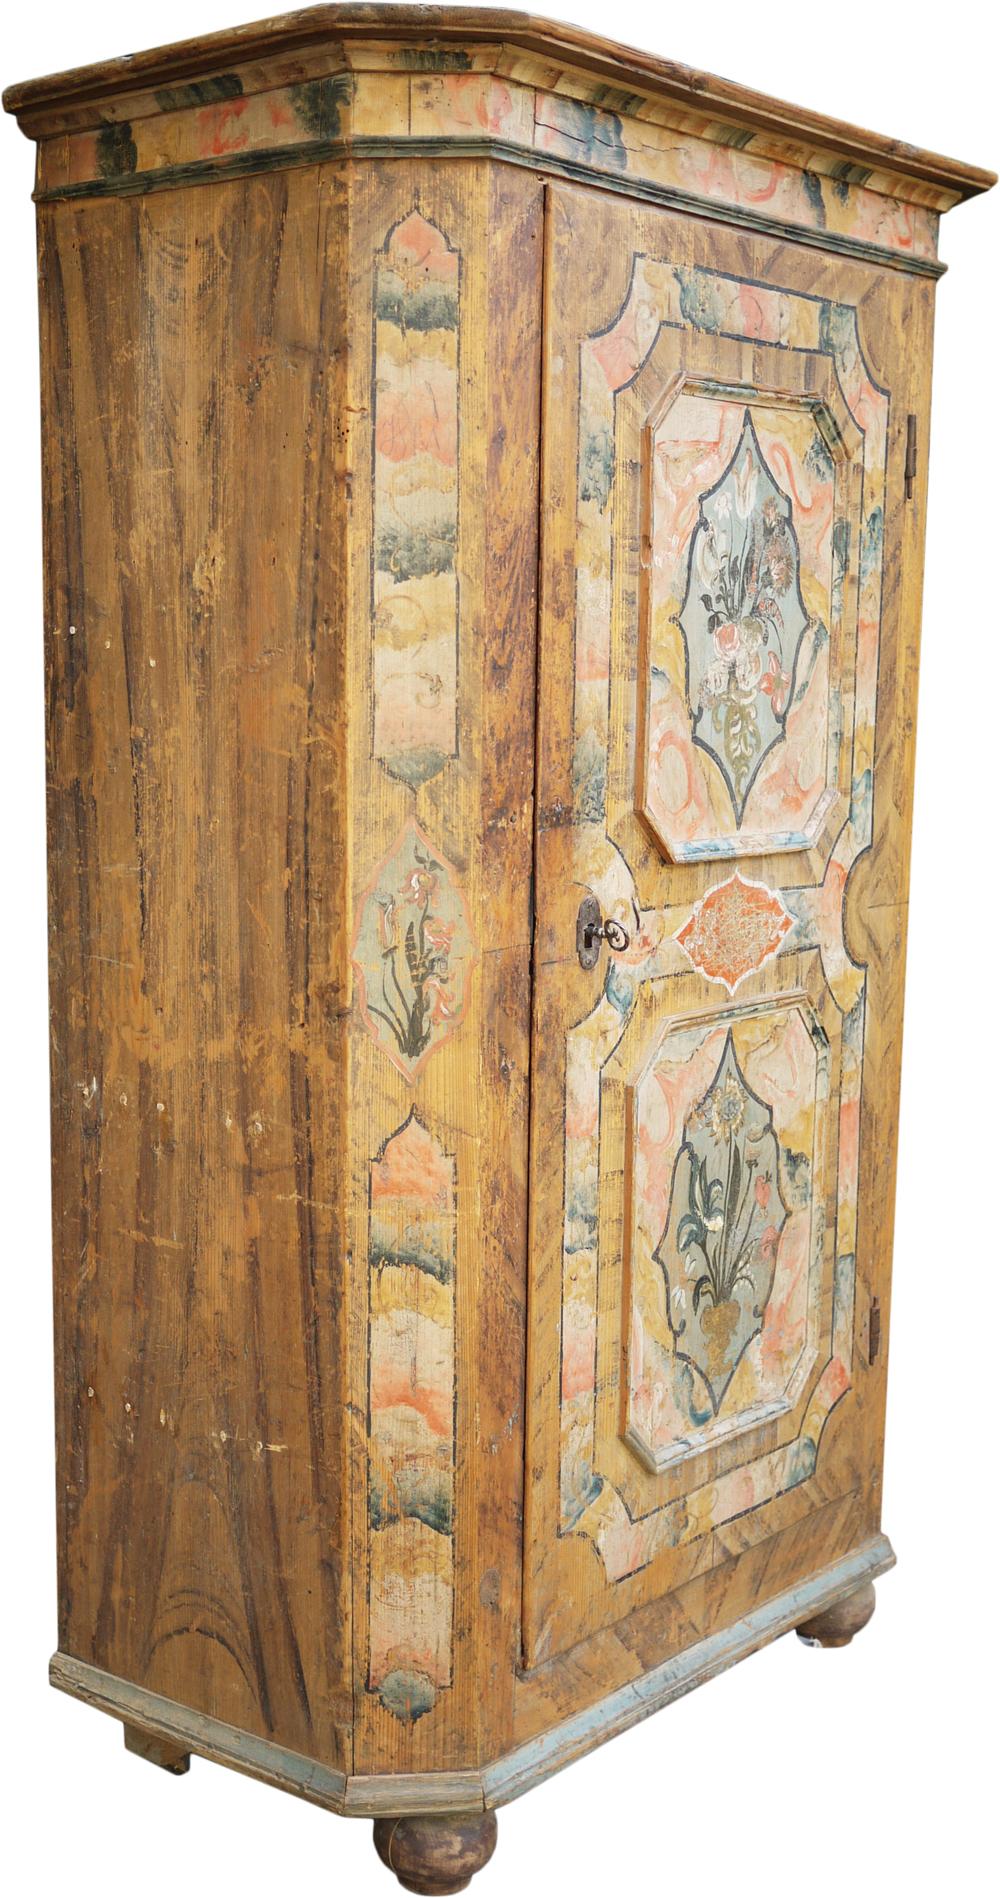 Painted Tyrolean wardrobe - mountain furniture

H.172cm - L.95cm (107cm to the frames) - P.50cm (56cm to the frames)
H. 67,7in - W.37,4in (42,1in to the frames) - P.19,6in (22in to the frames)

Tyrolean (Northern Italy) painted cabinet with one